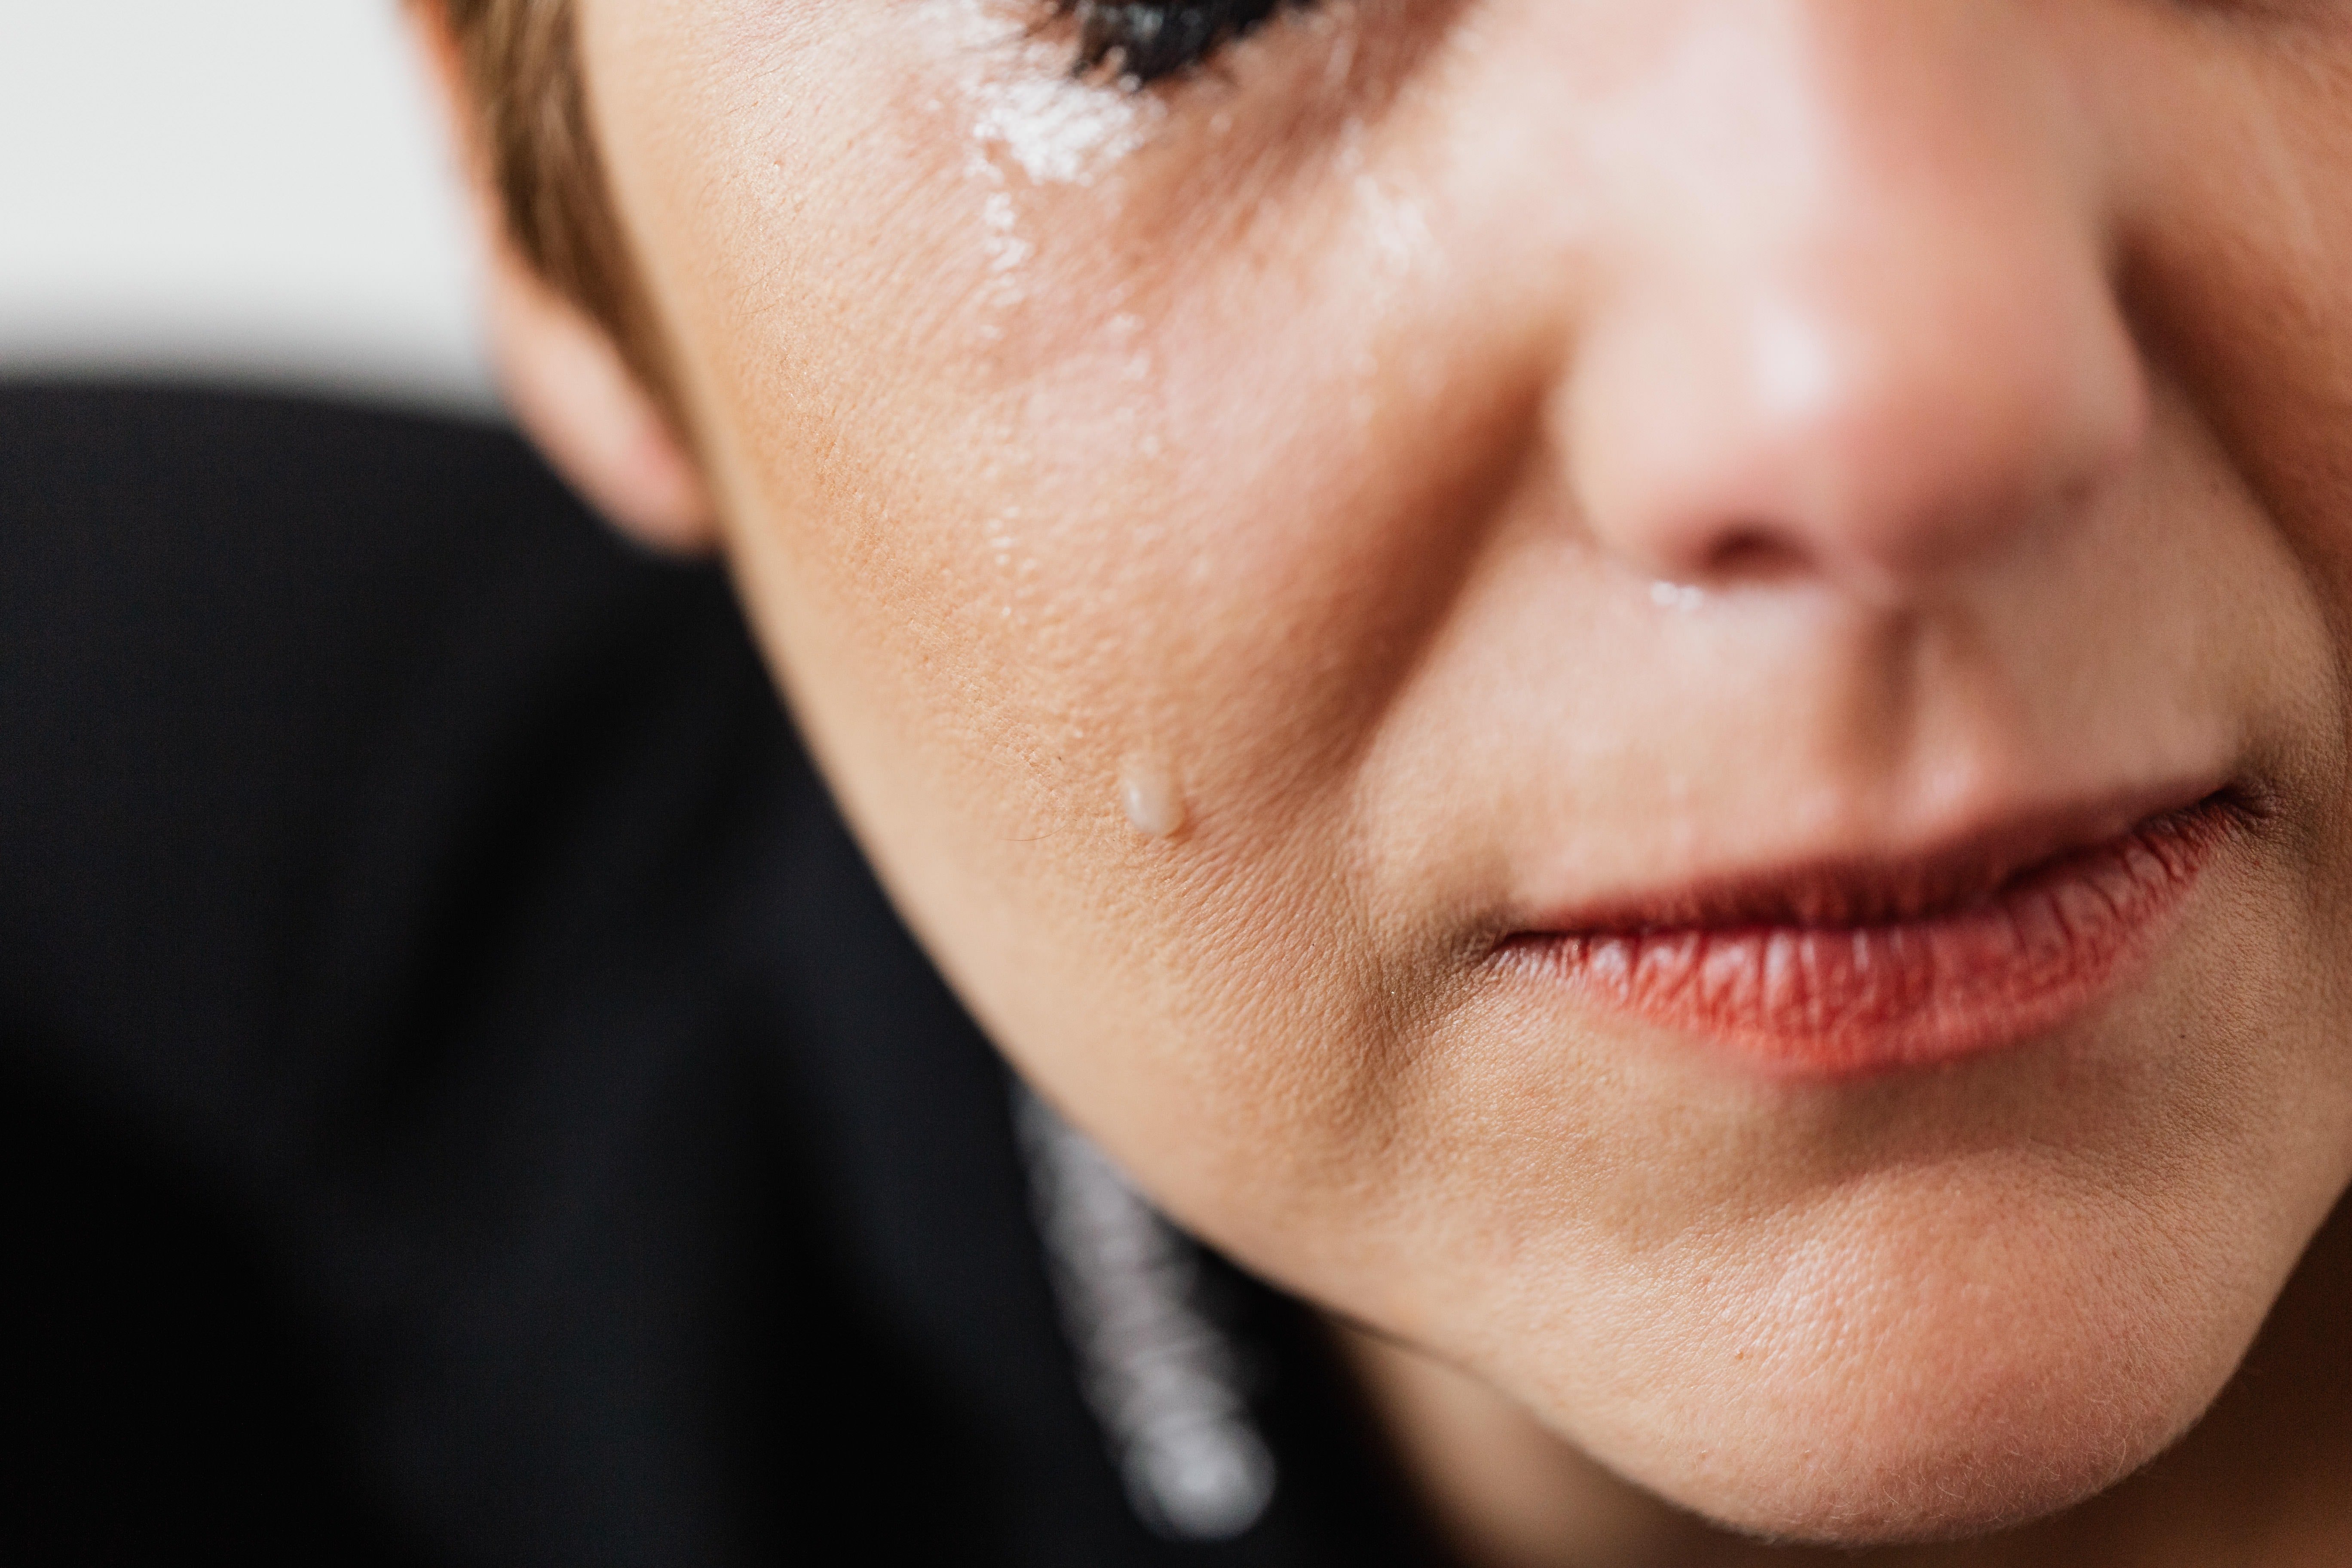 Woman crying | Source: Pexels